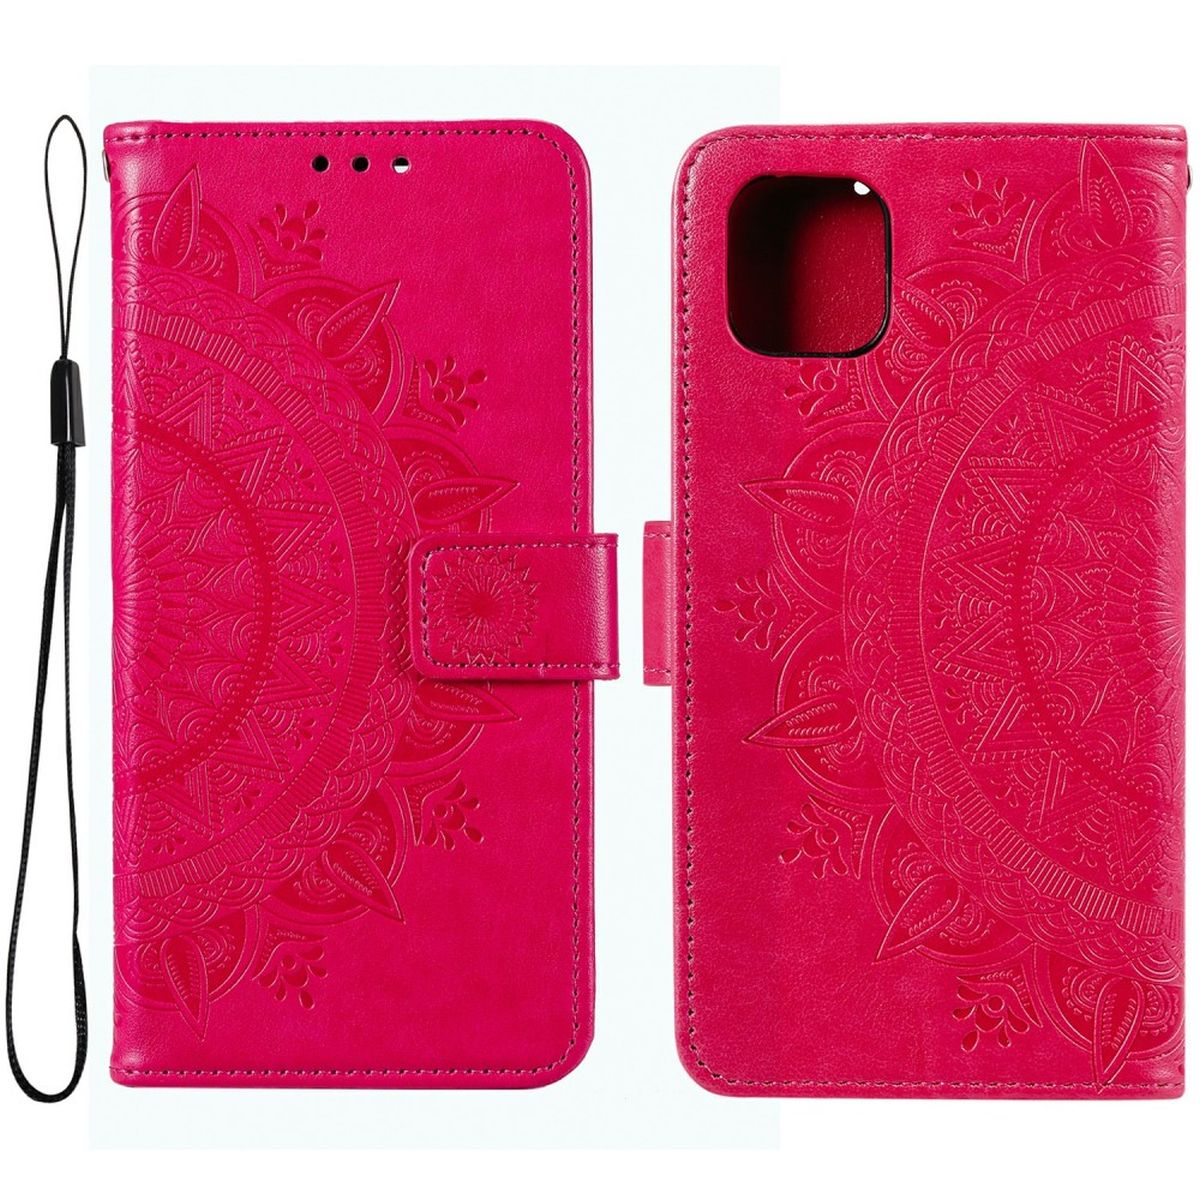 Bookcover, A03, Muster, Samsung, mit Klapphülle Mandala Galaxy Pink COVERKINGZ